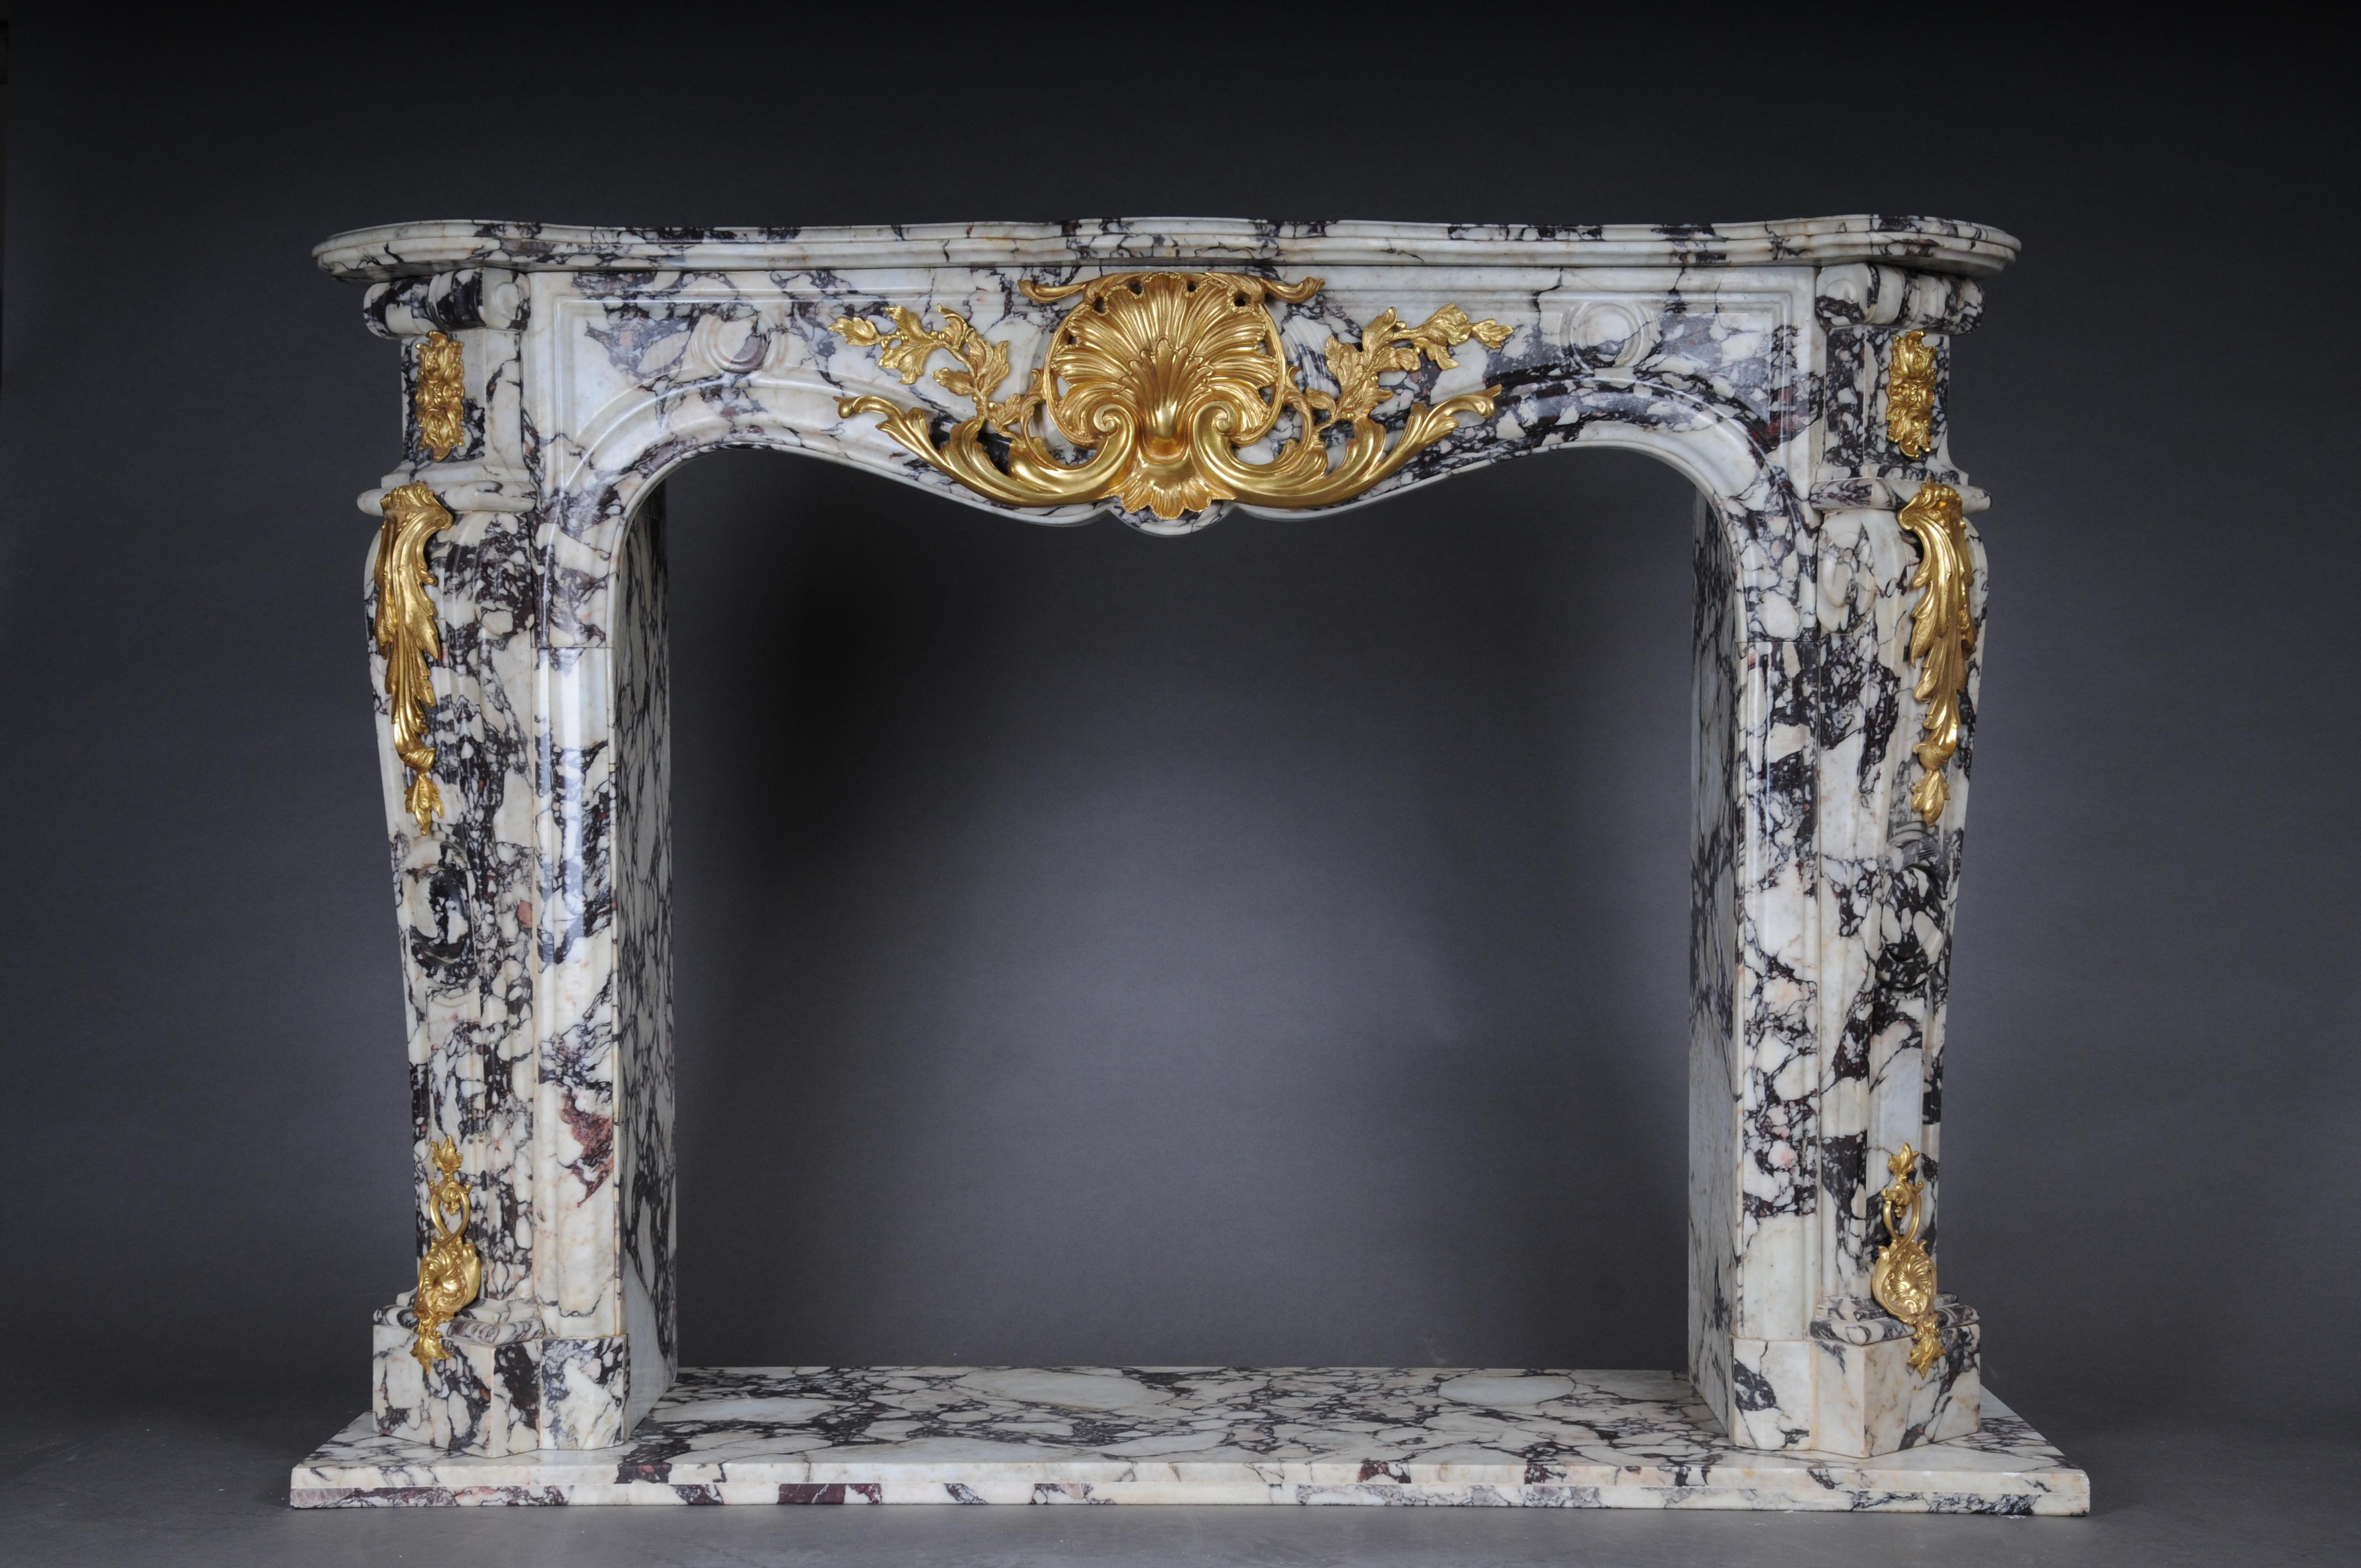 Magnificent French marble fireplace with gilded bronze.

Multiple and elegantly curved white marble with black mottle. Tall and very elegant structure in classic French style, adorned/covered with finely engraved and gilded bronze applications. In